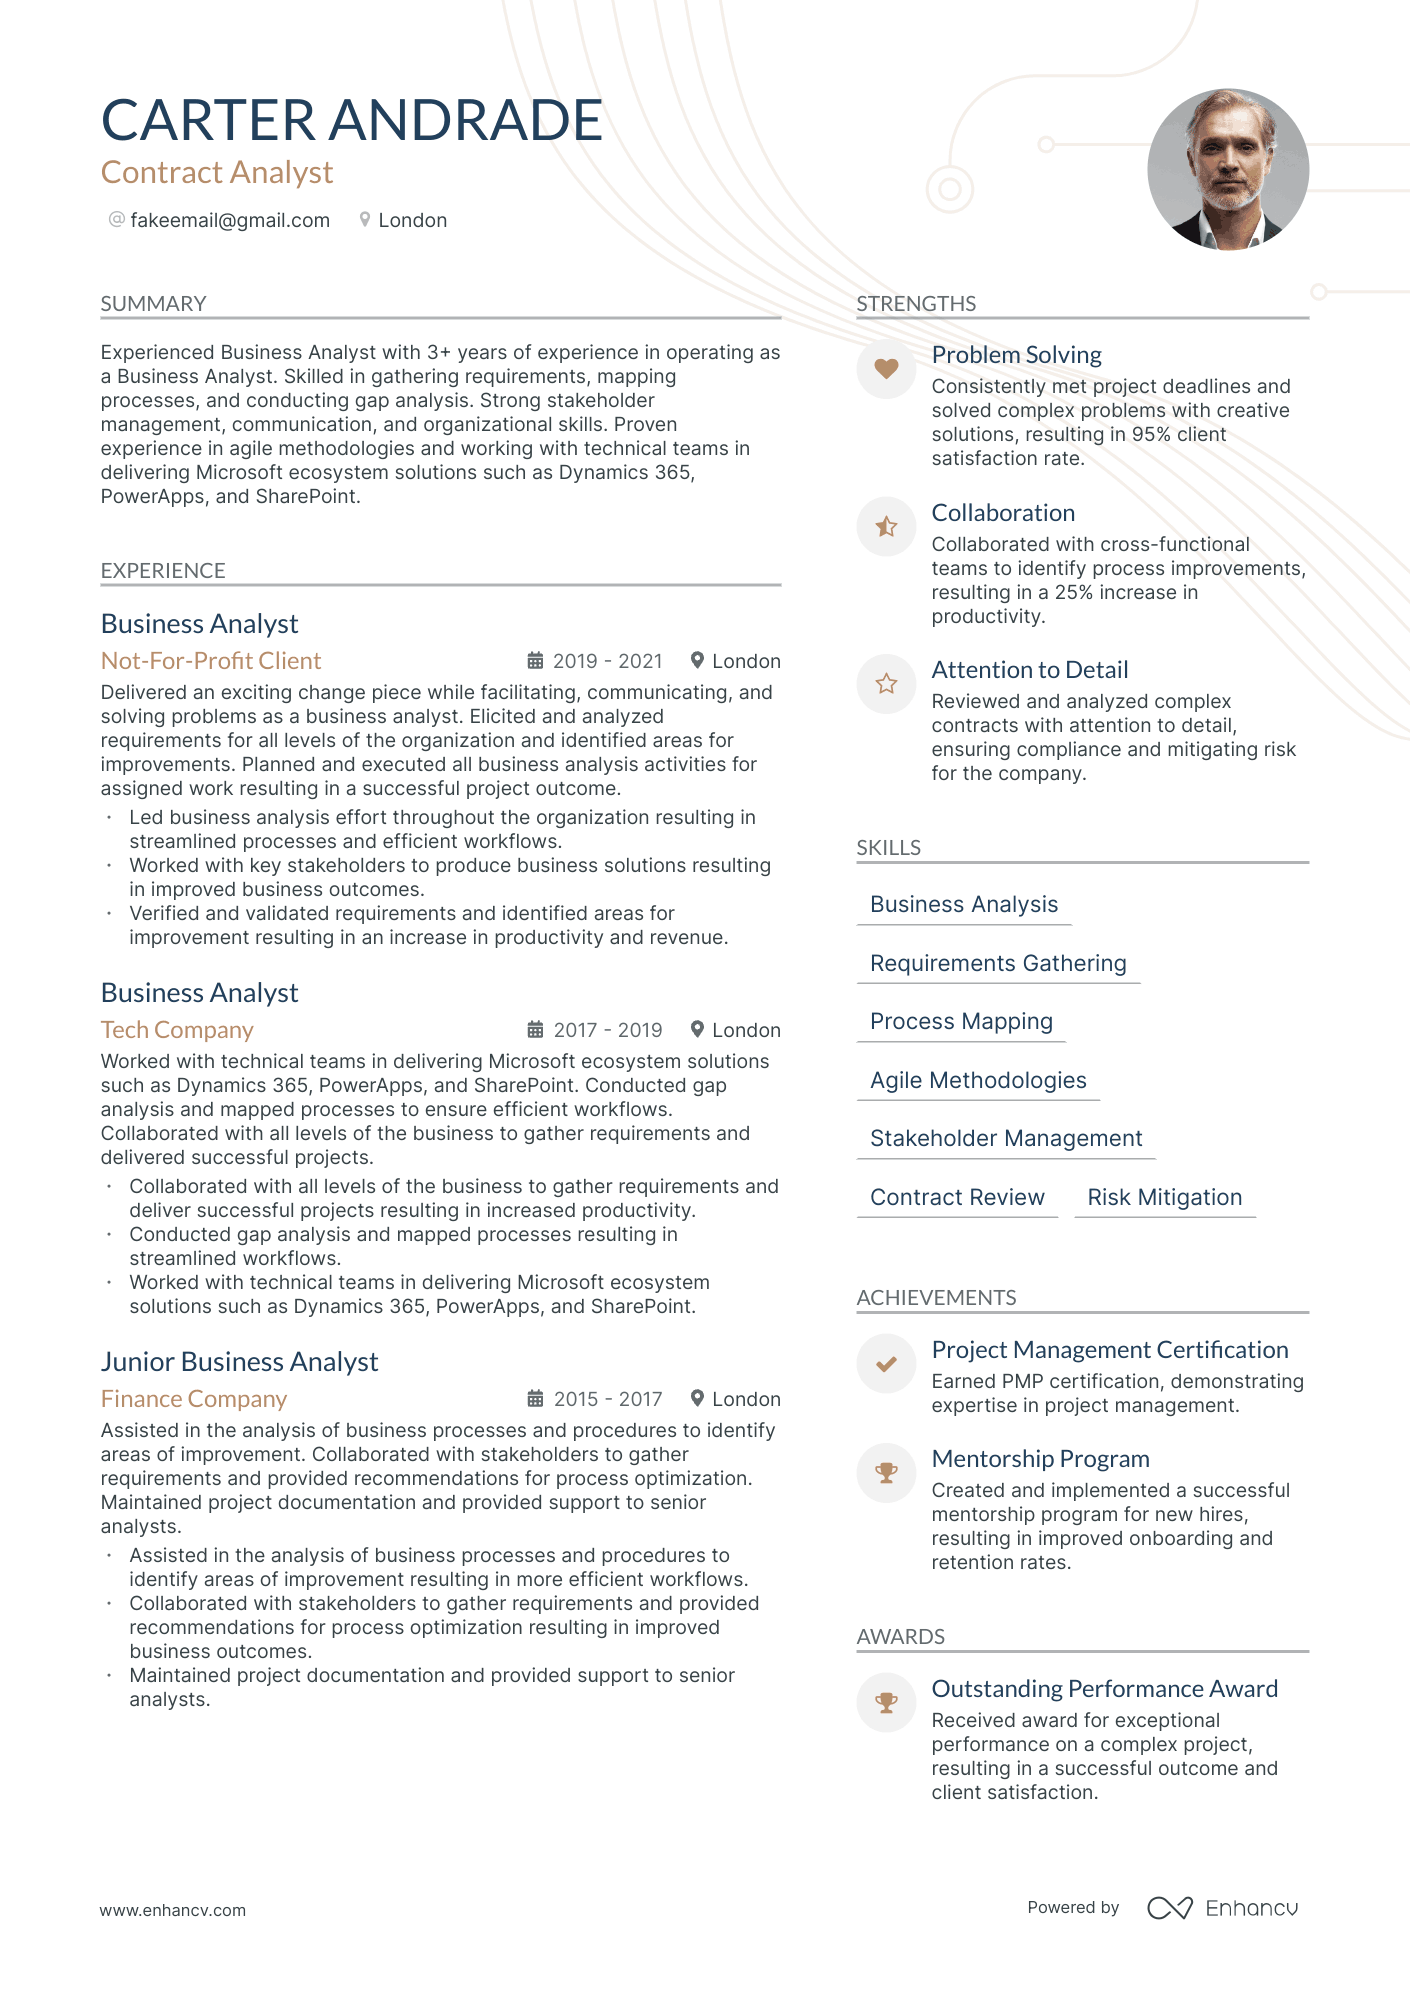 Contract Analyst resume example